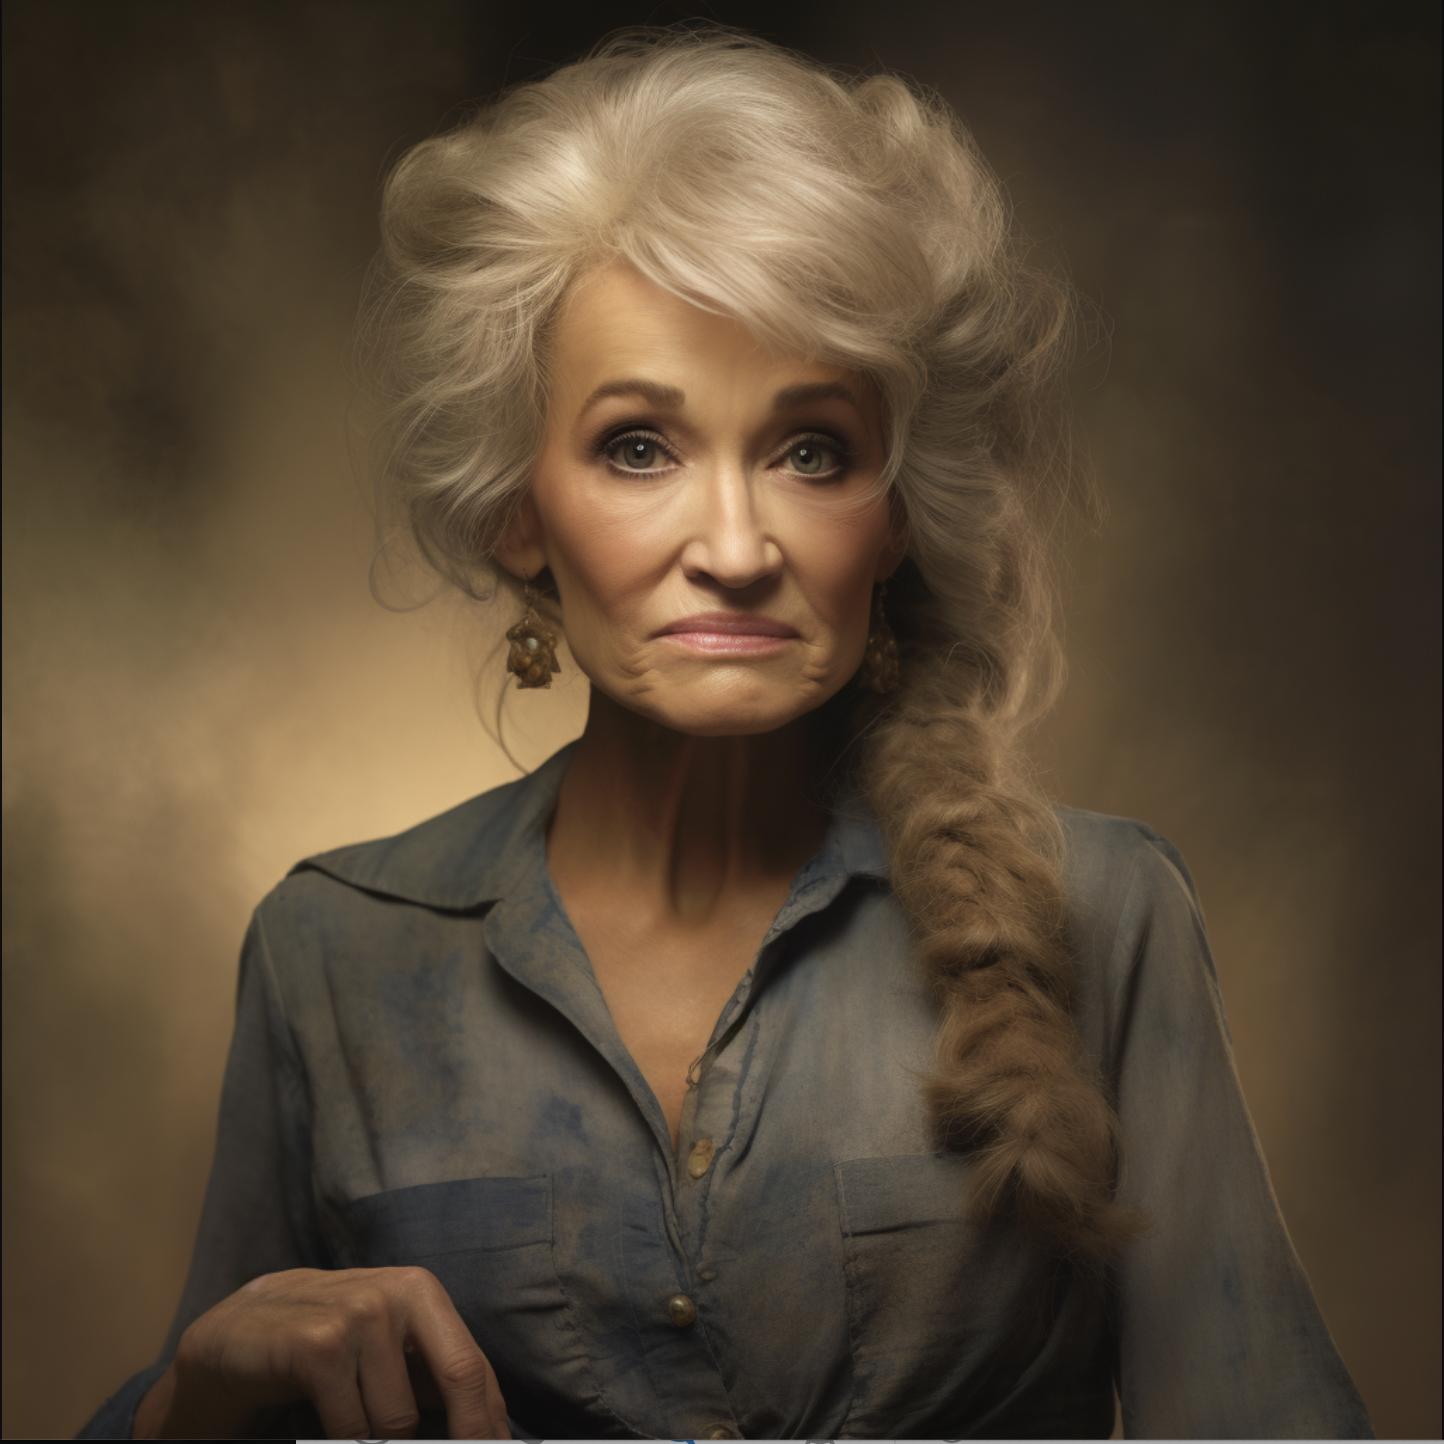 How Carrie Underwood might look at 70 via AI | Source: Midjourney